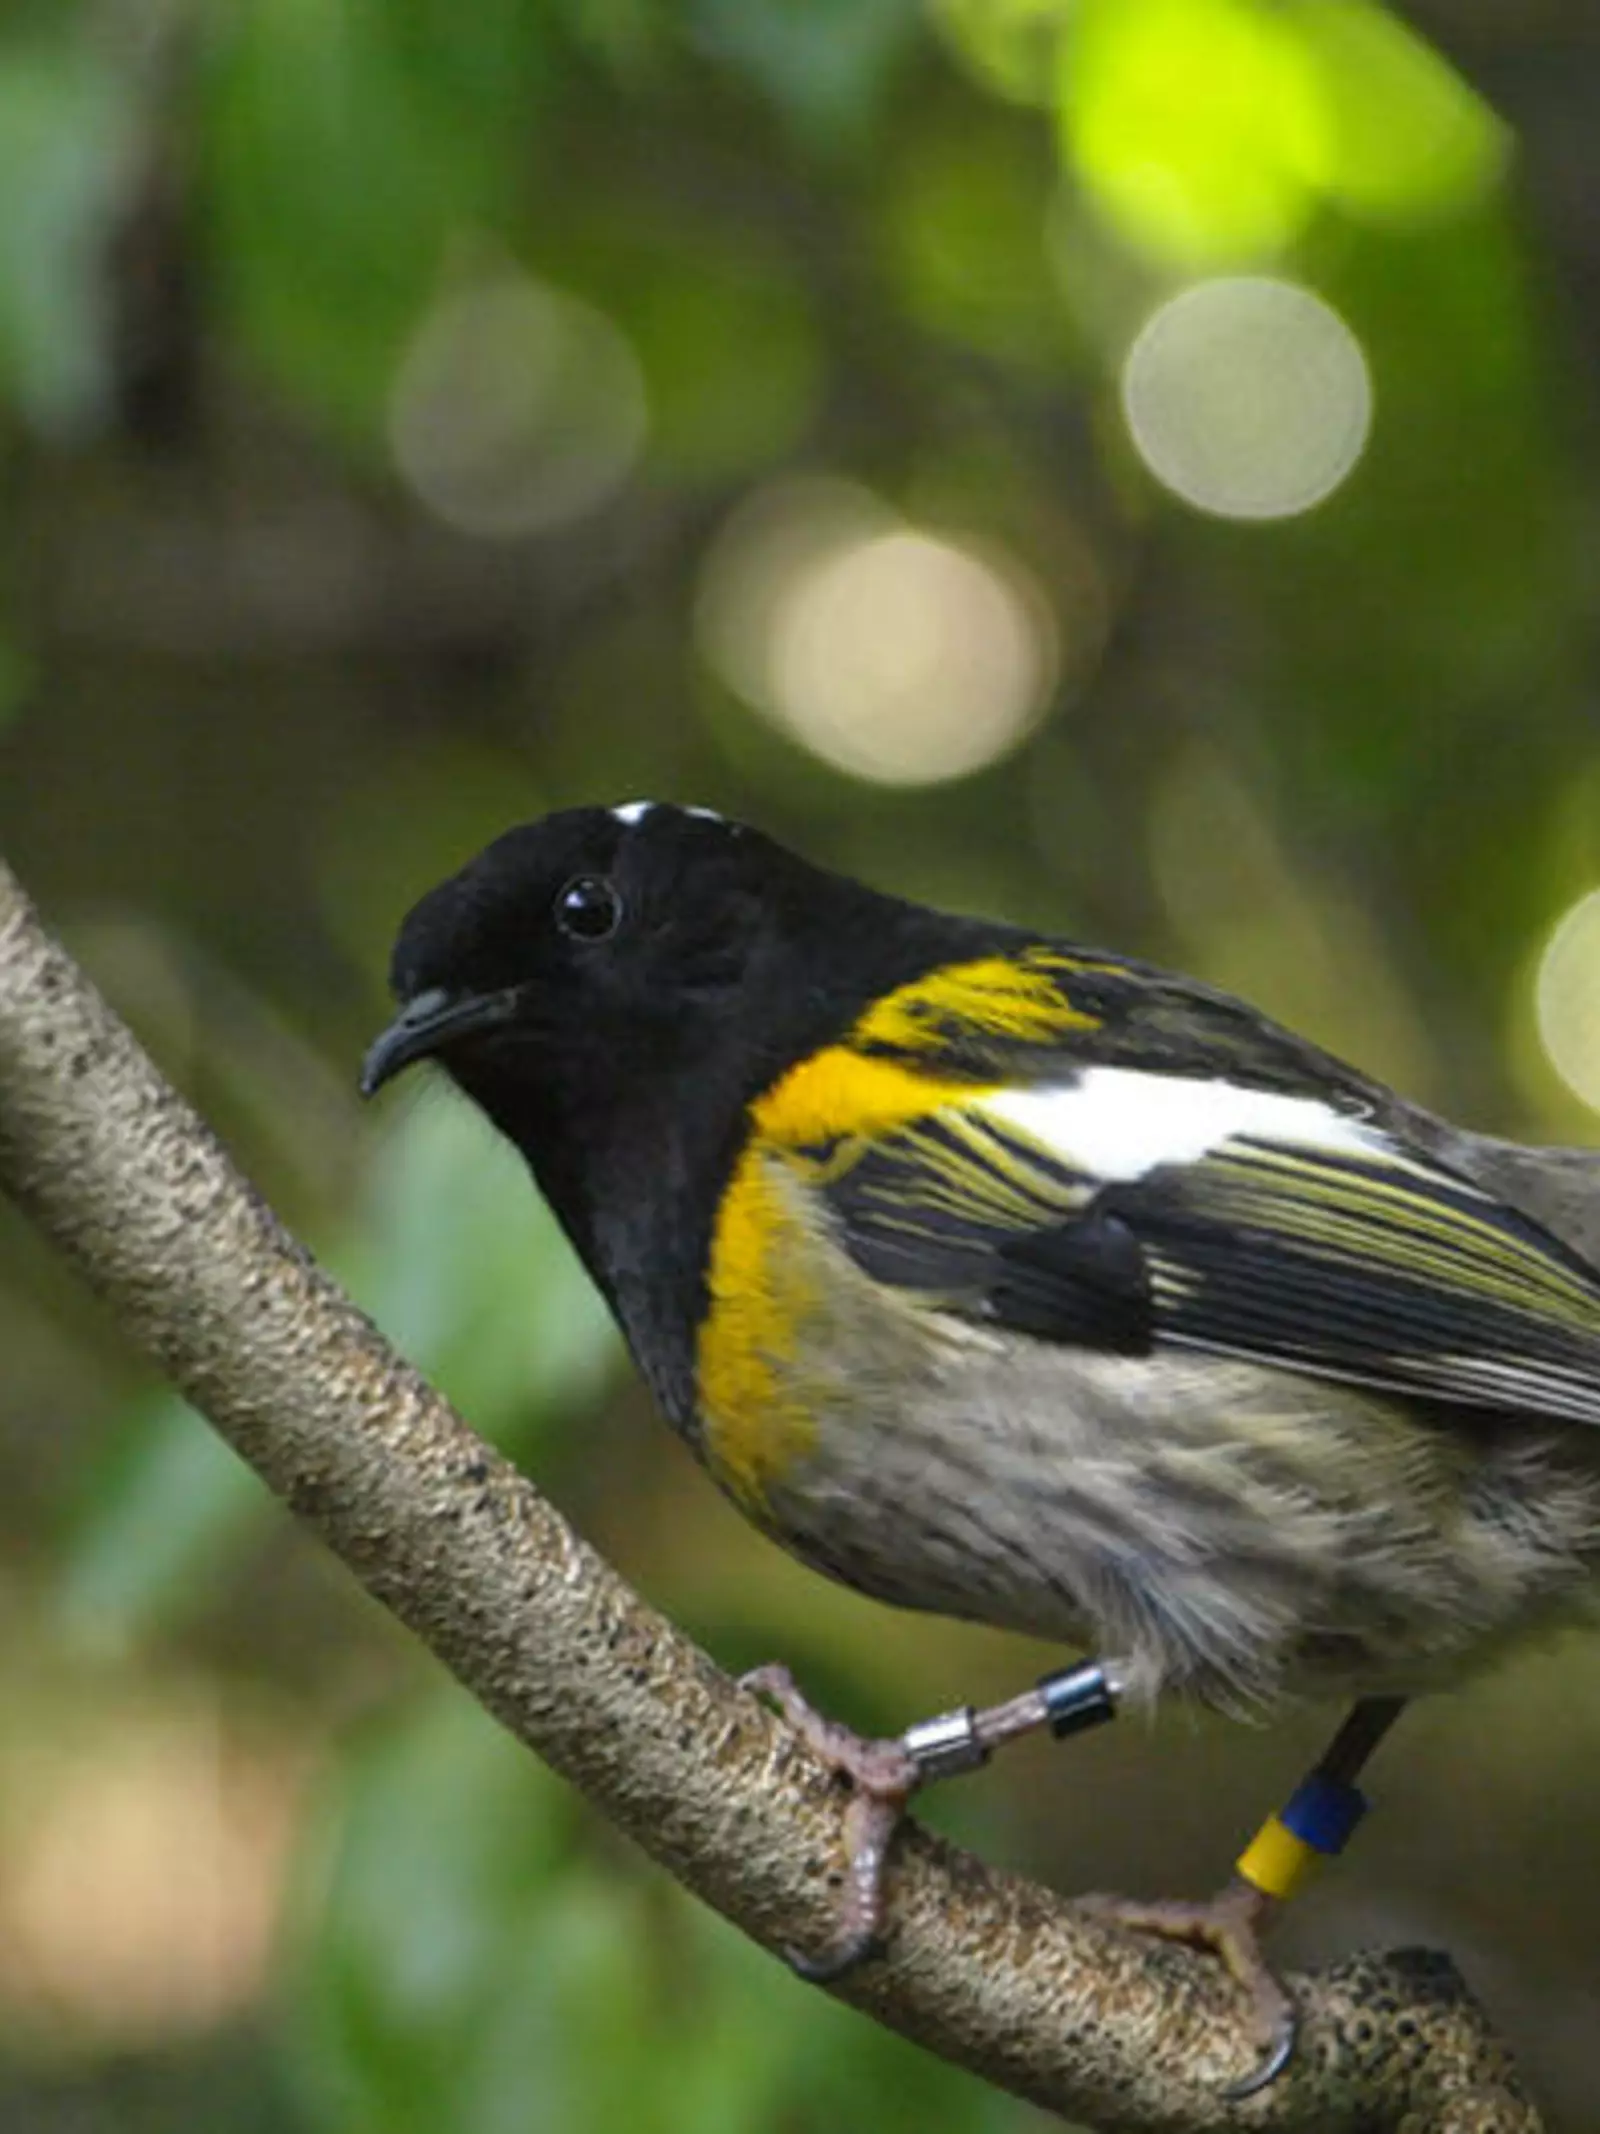 Male hihi on a branch